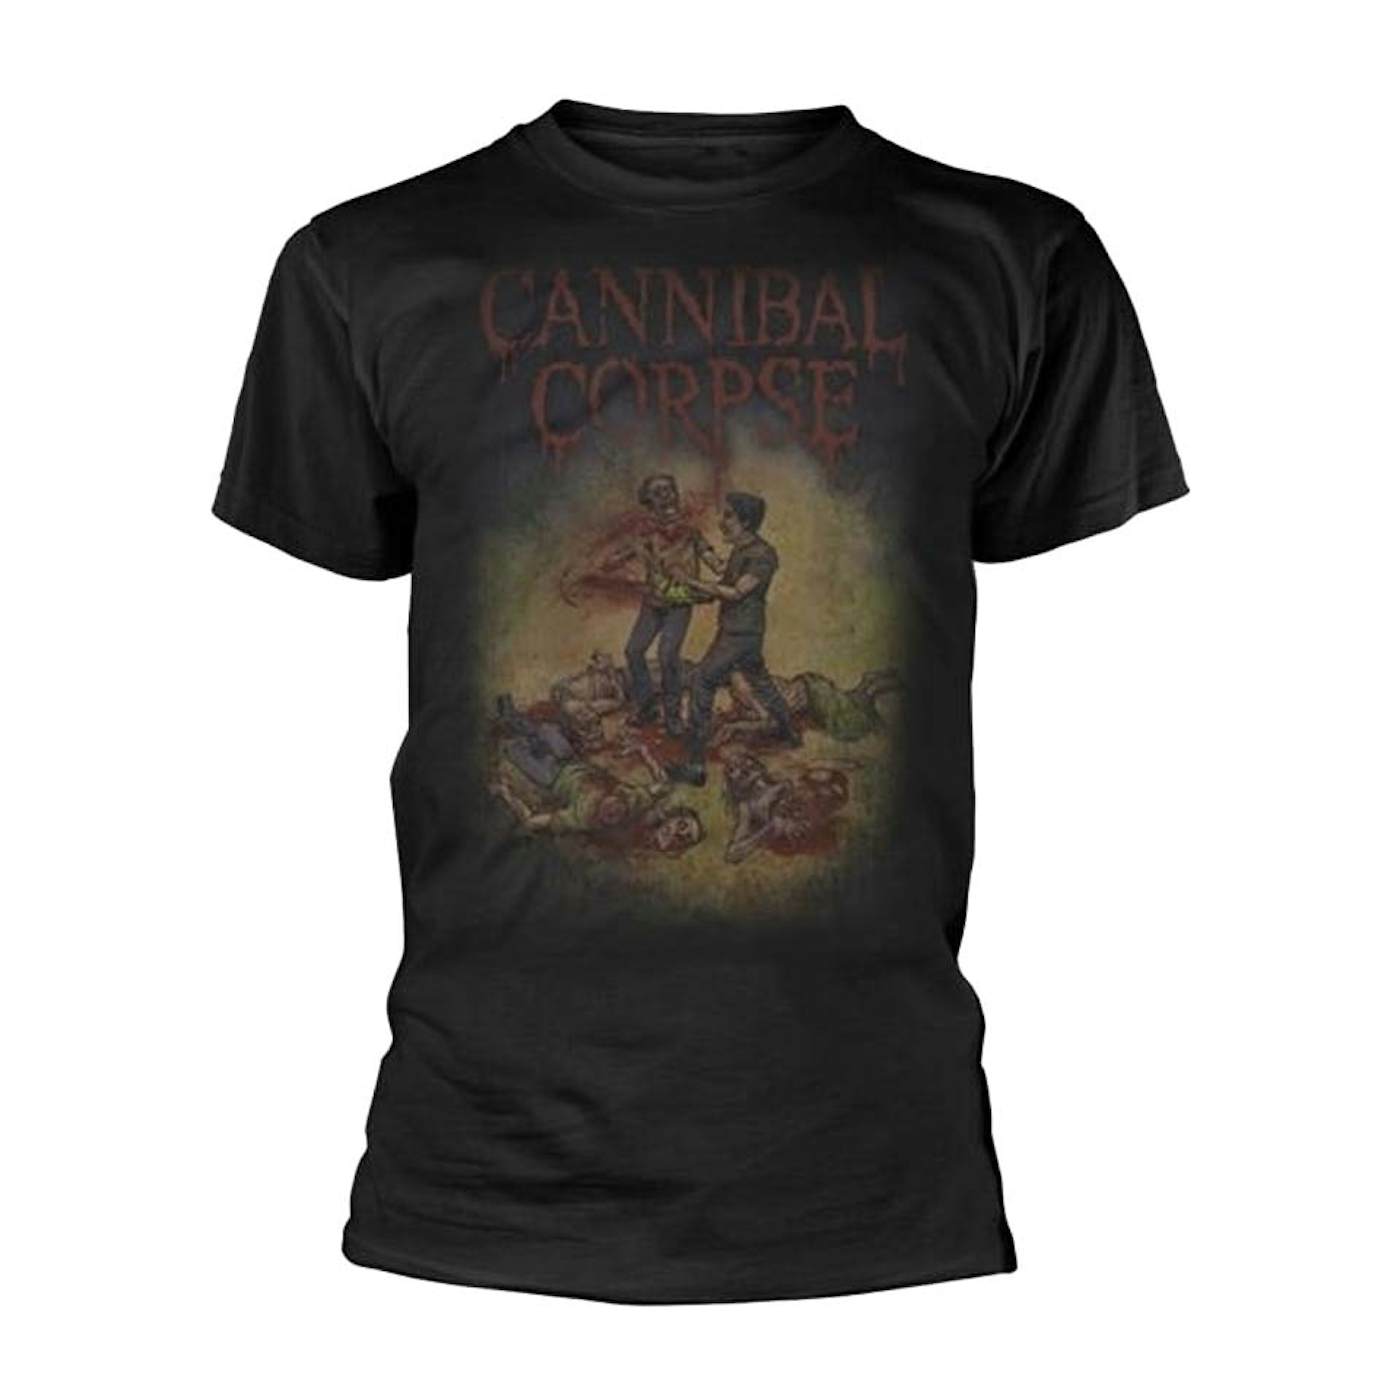 Cannibal Corpse T-Shirt - Chainsaw